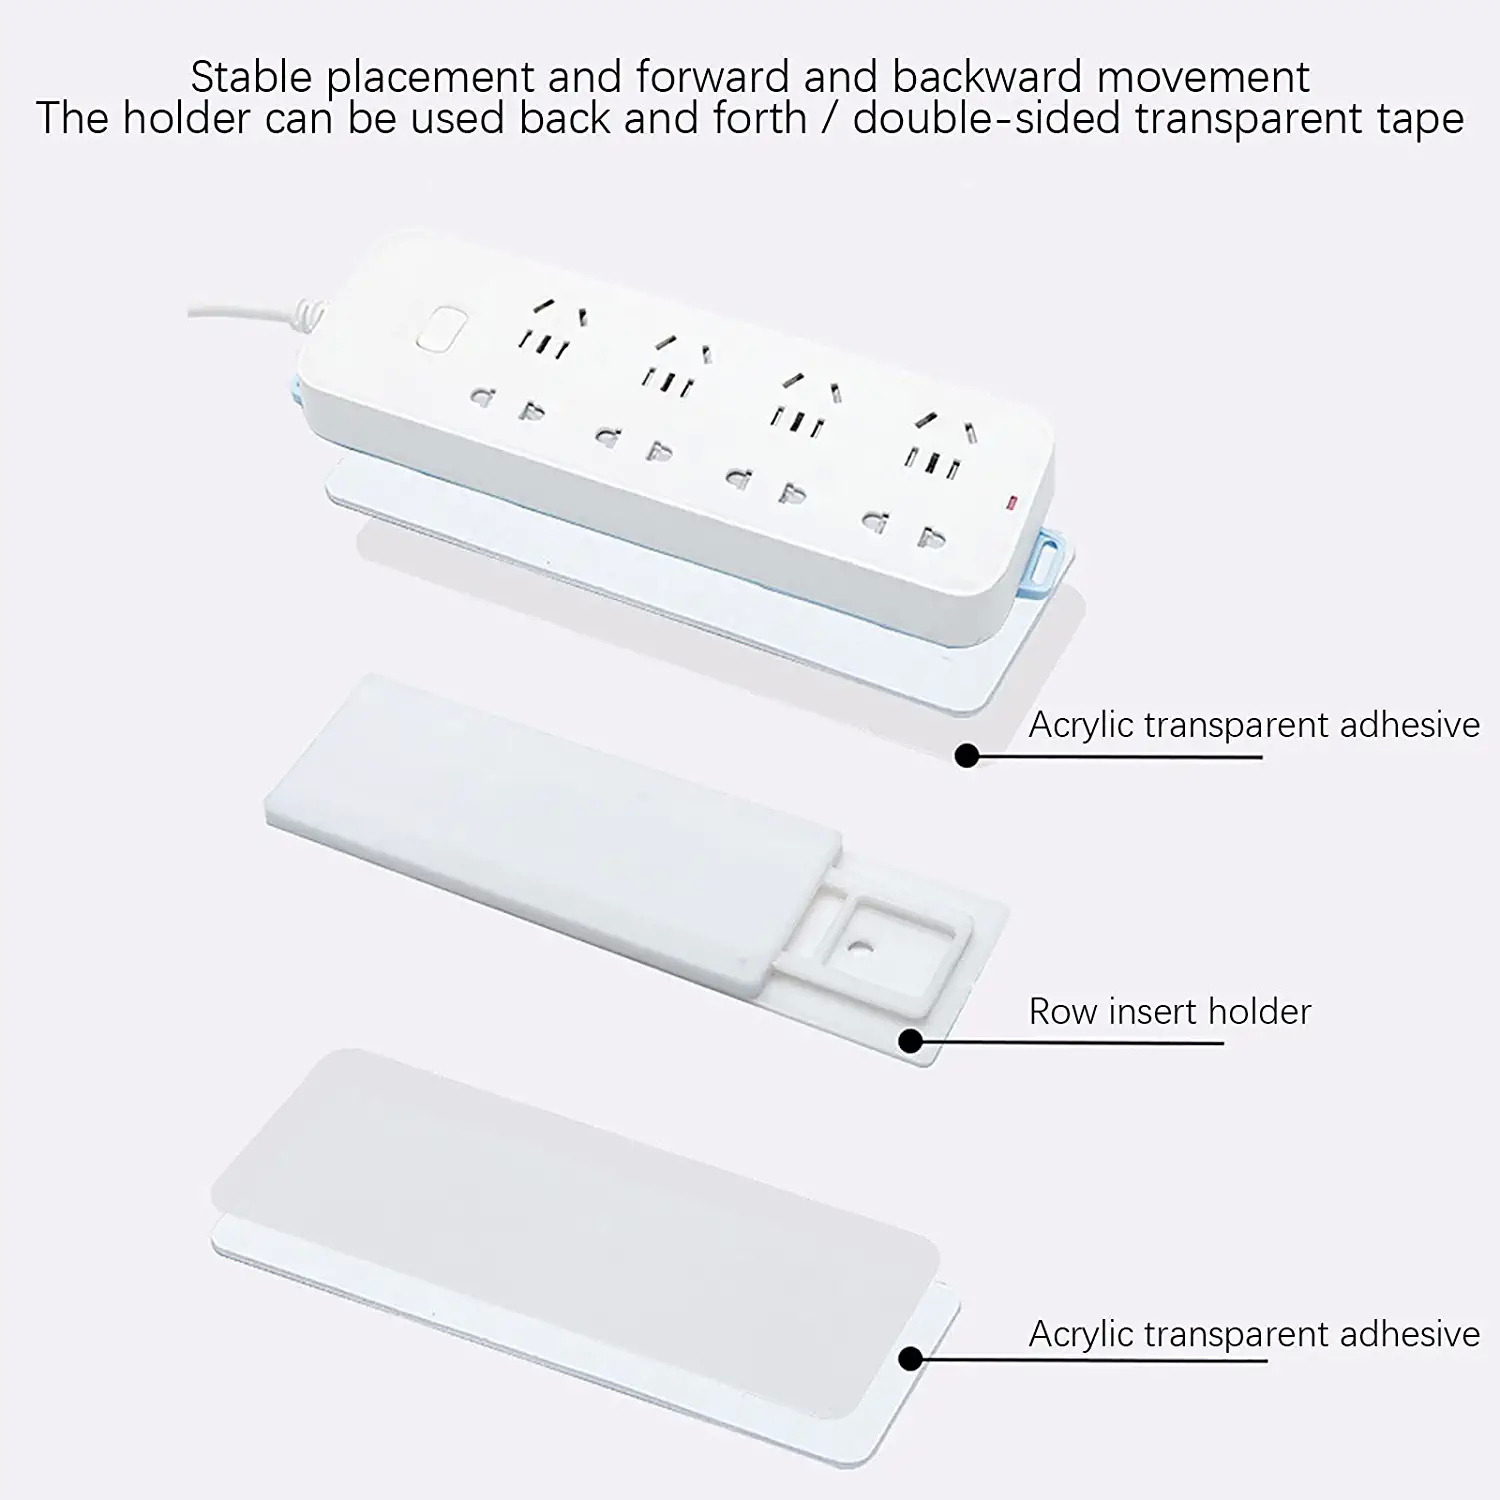 Powerboards-Self-Adhesive-Power-Strip-Holder-Power-Strip-Fixator-Wall-Mount-No-Punch-Socket-Cable-Fixer-for-Surge-WiFi-Router-Tissue-Box-Remote-Control-Organizer-6